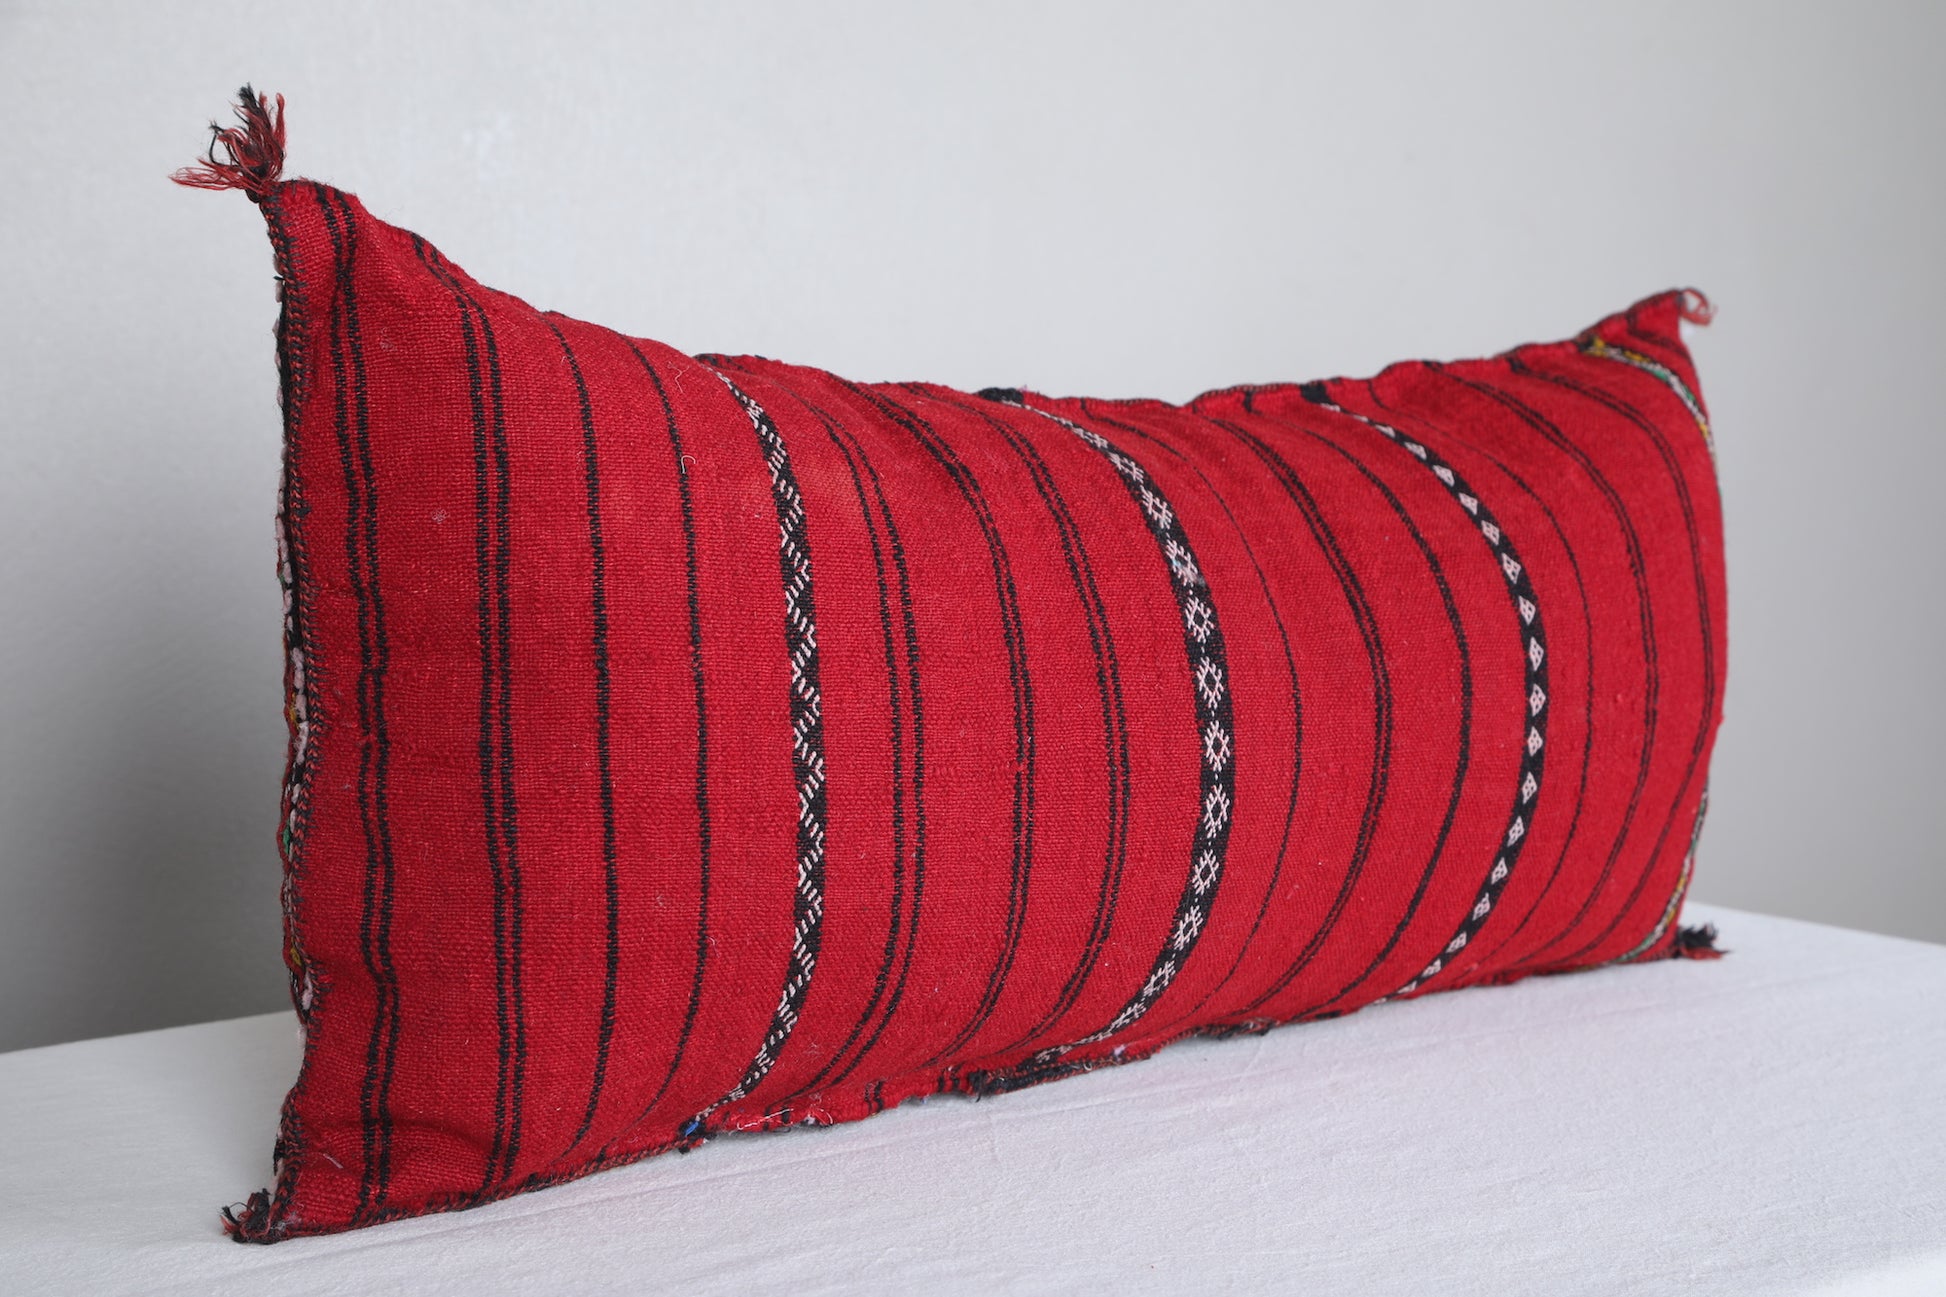 Long Moroccan berber pillow 14.1 INCHES X 31.4 INCHES